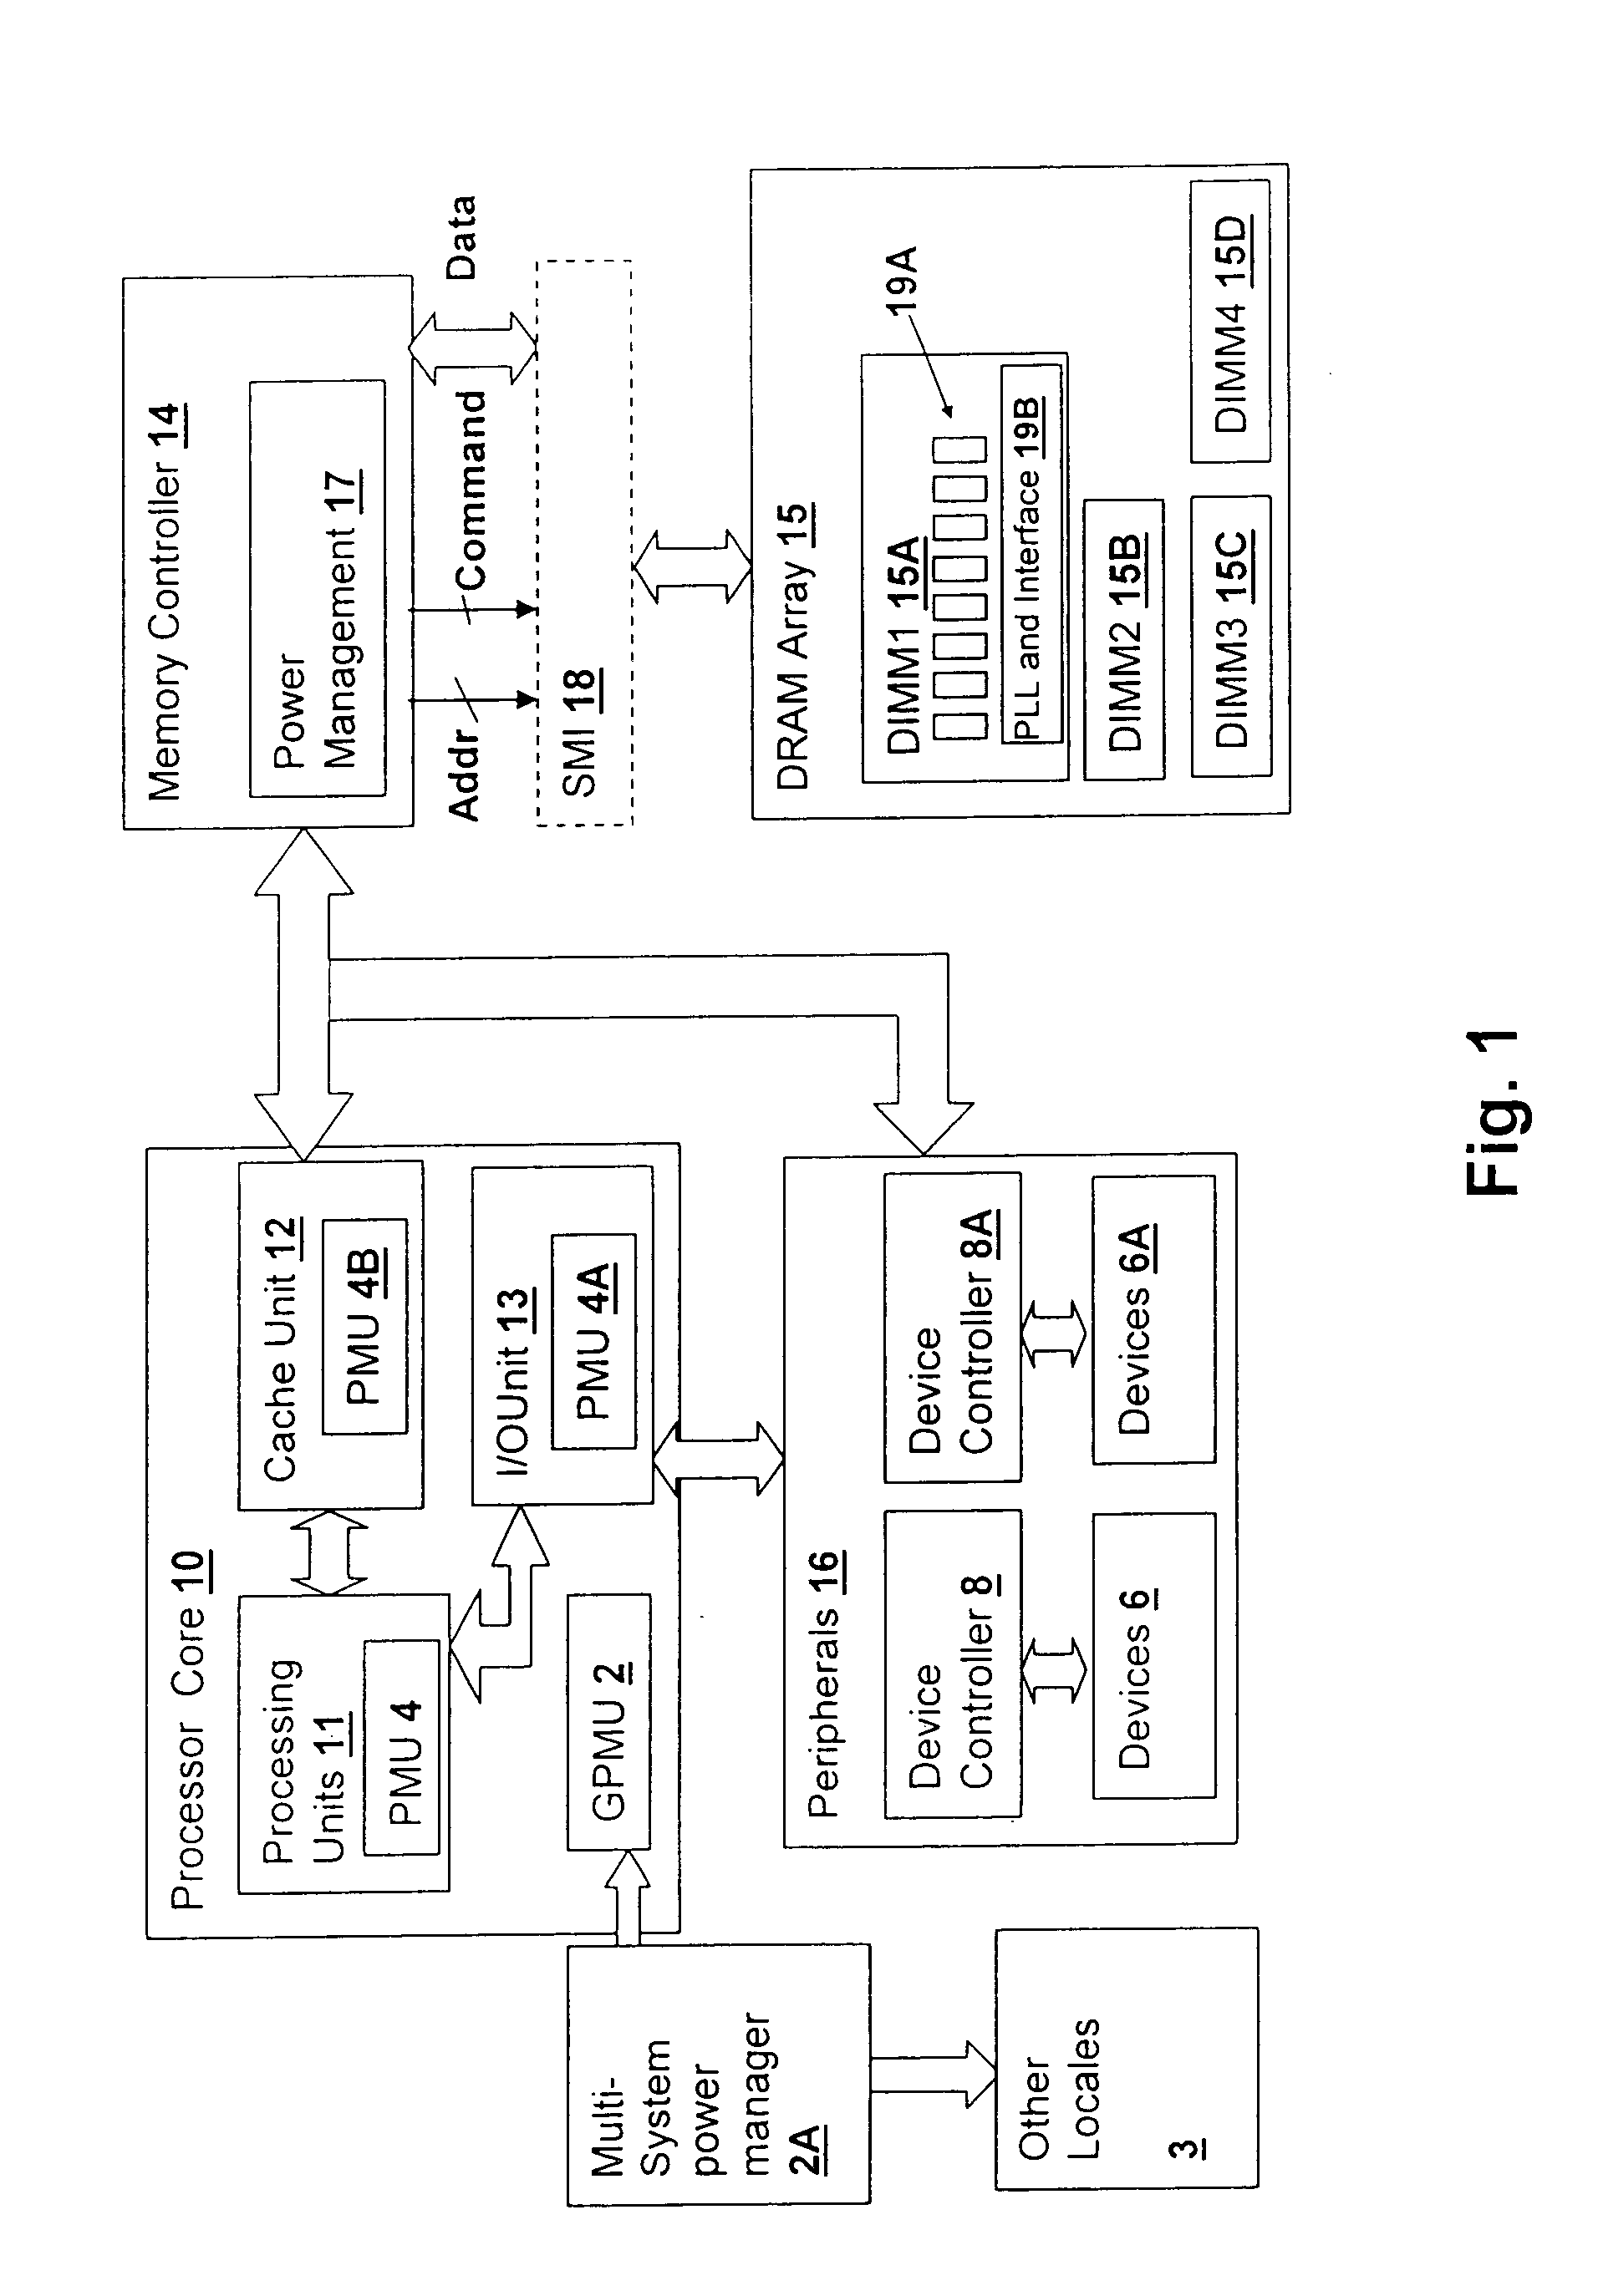 Method and system for power management including local bounding of device group power consumption